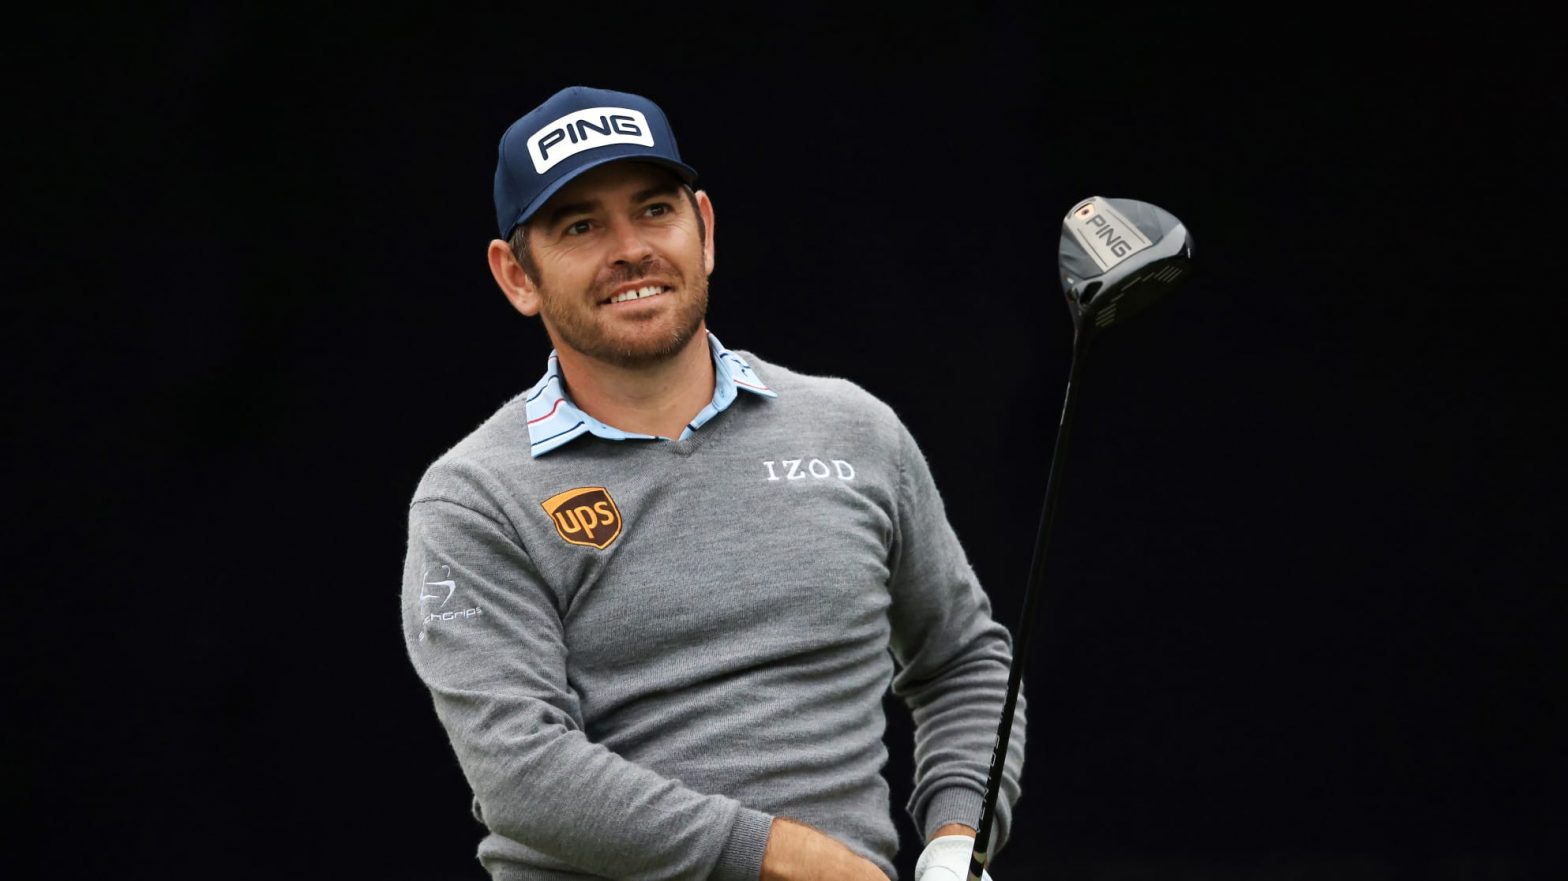 Oosthuizen in the hunt at US Open